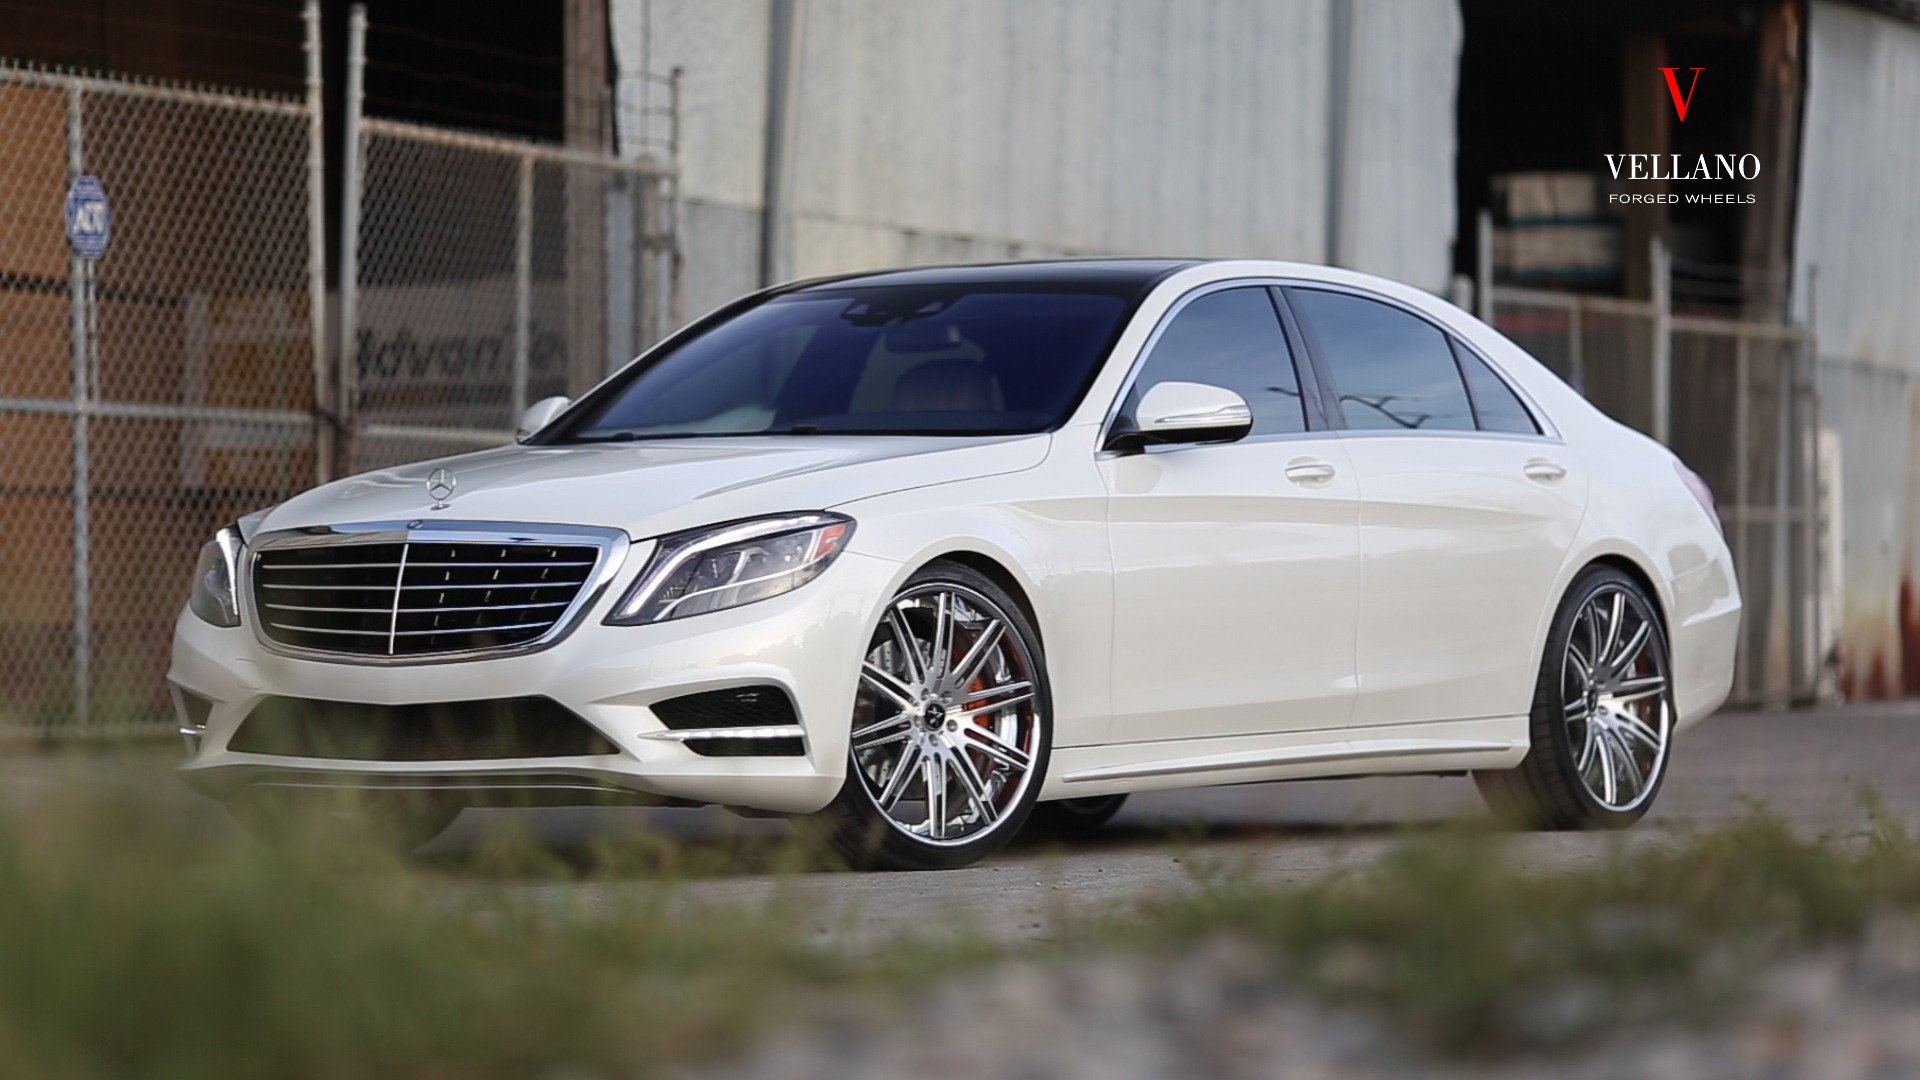 MERCEDES BENZ S550 ON VCP CONCAVE